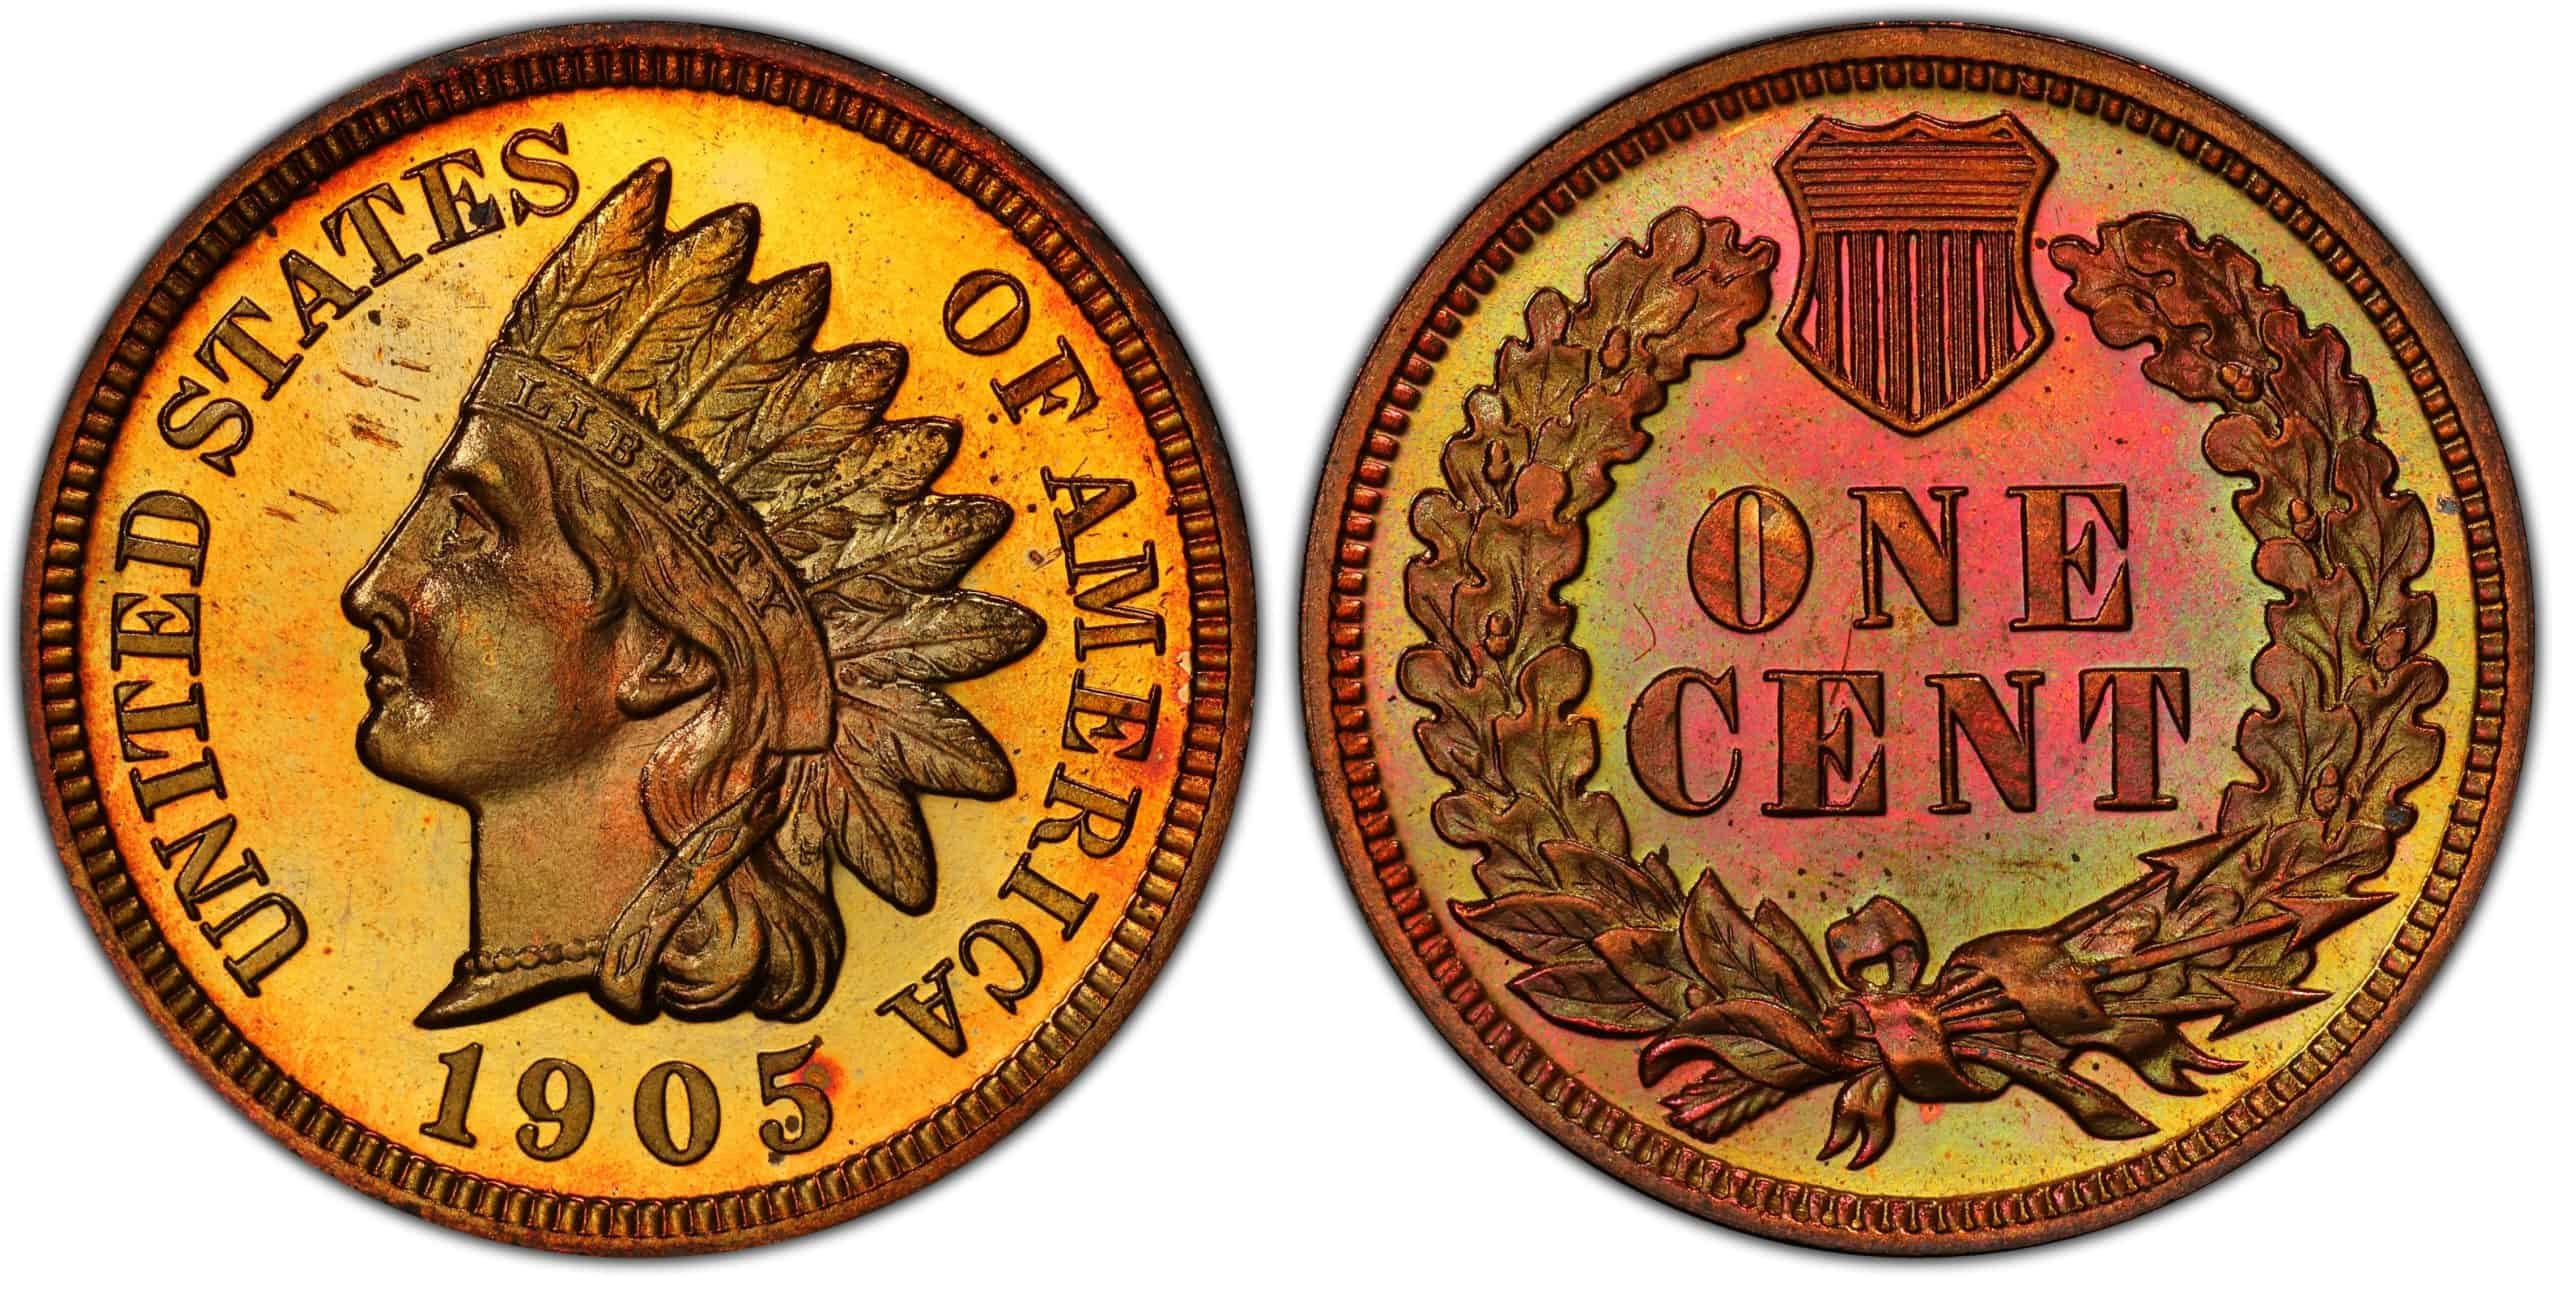 1905 proof Indian head penny